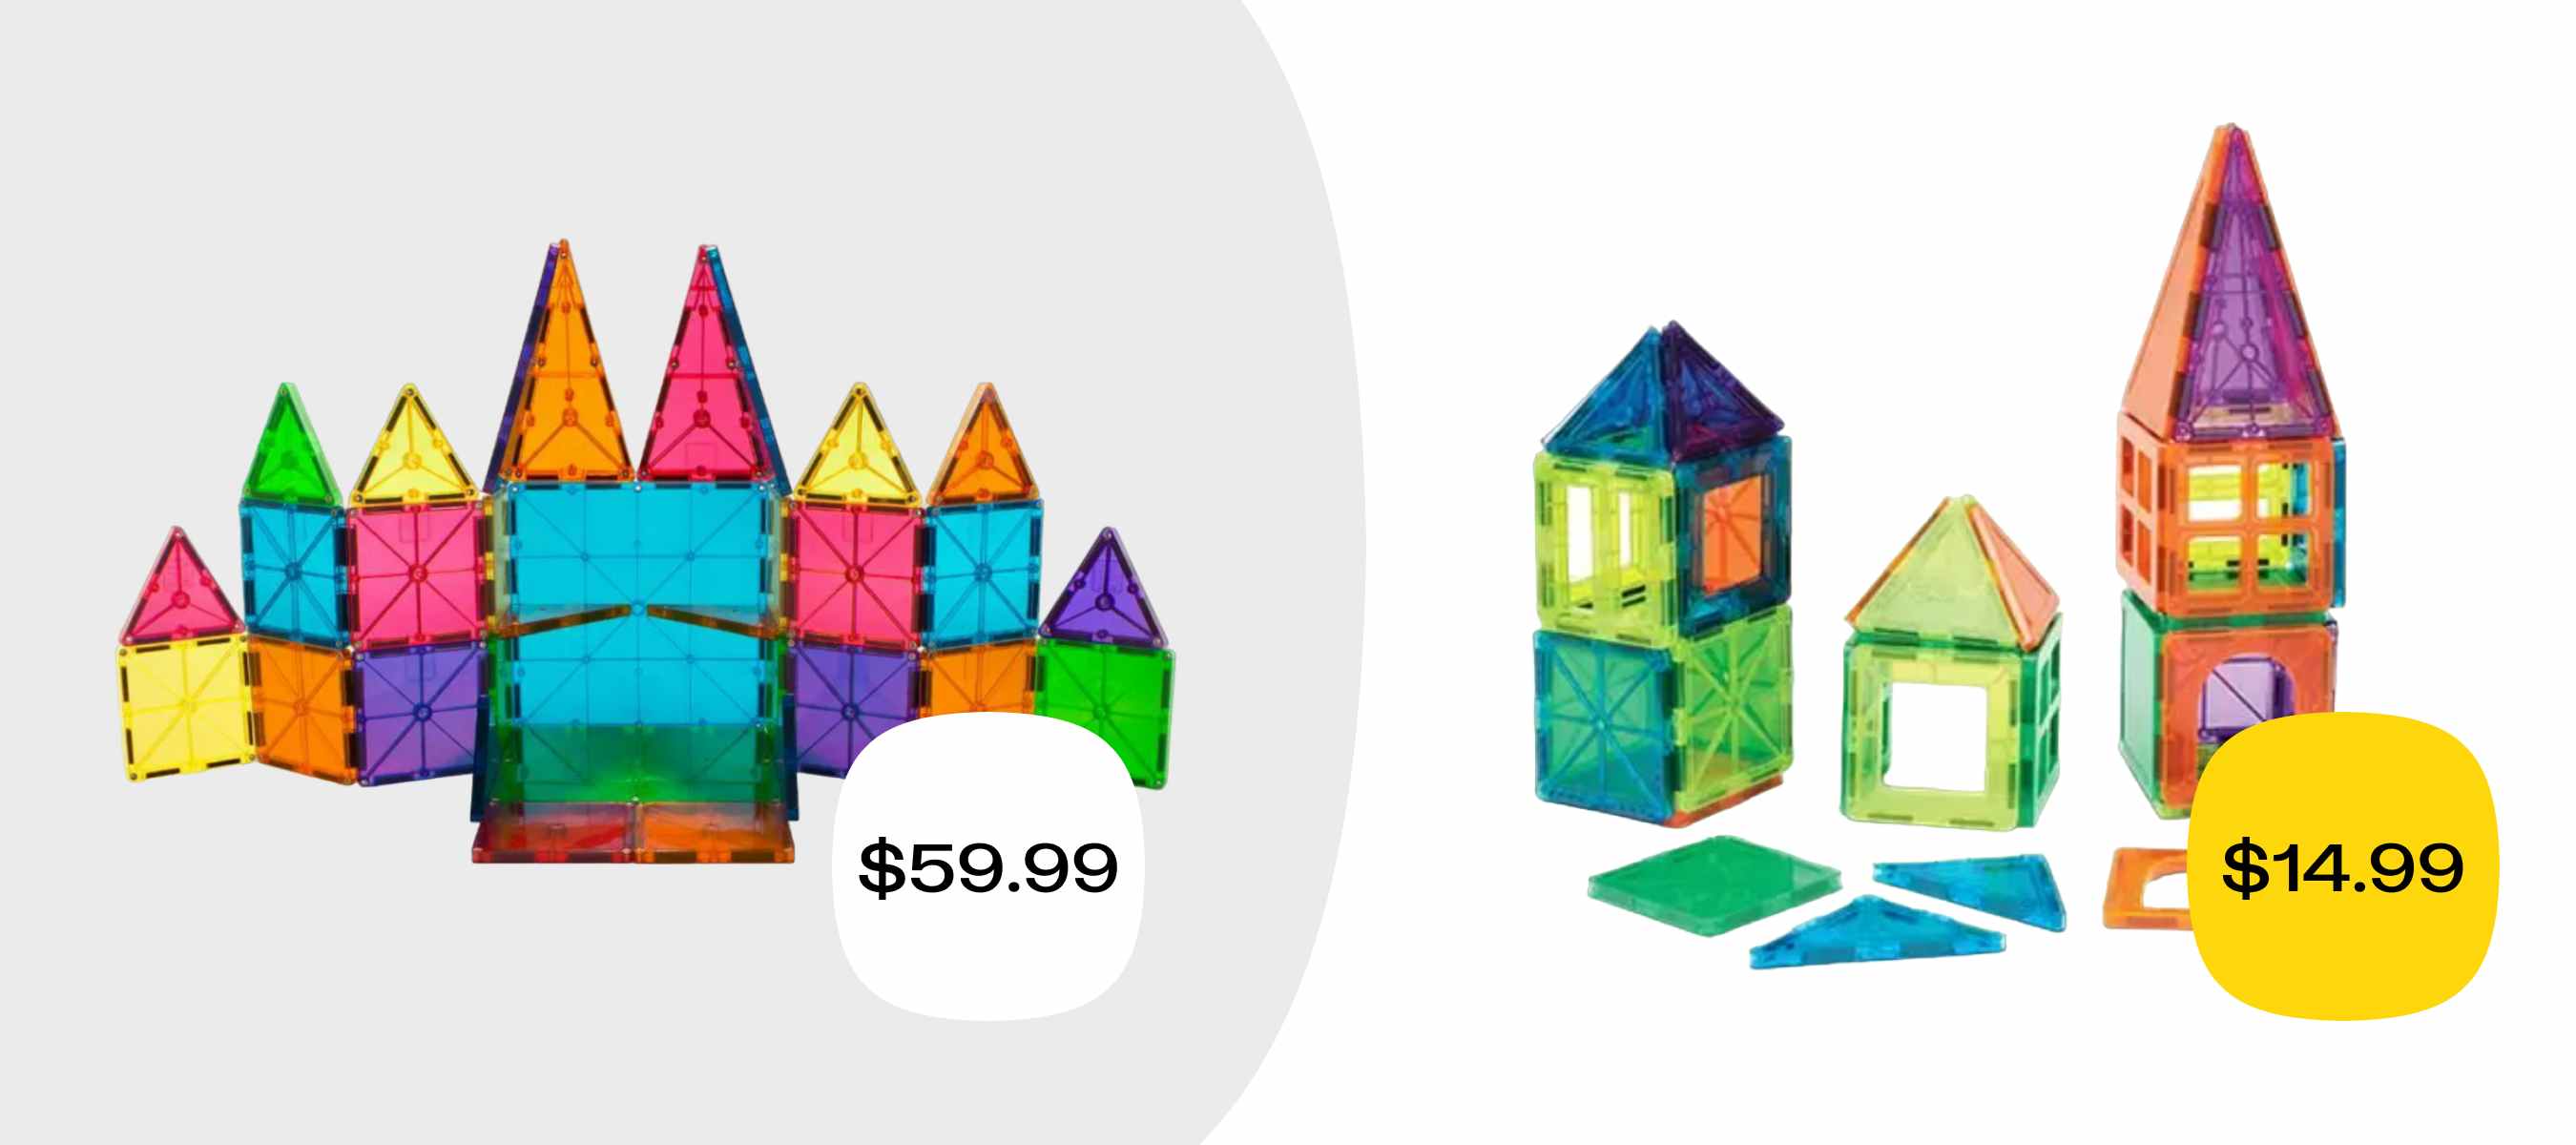 https://prod-cdn-thekrazycouponlady.imgix.net/wp-content/uploads/2023/02/magna-tiles-dupe-1695664559-1695664560.png?auto=format&fit=fill&q=25